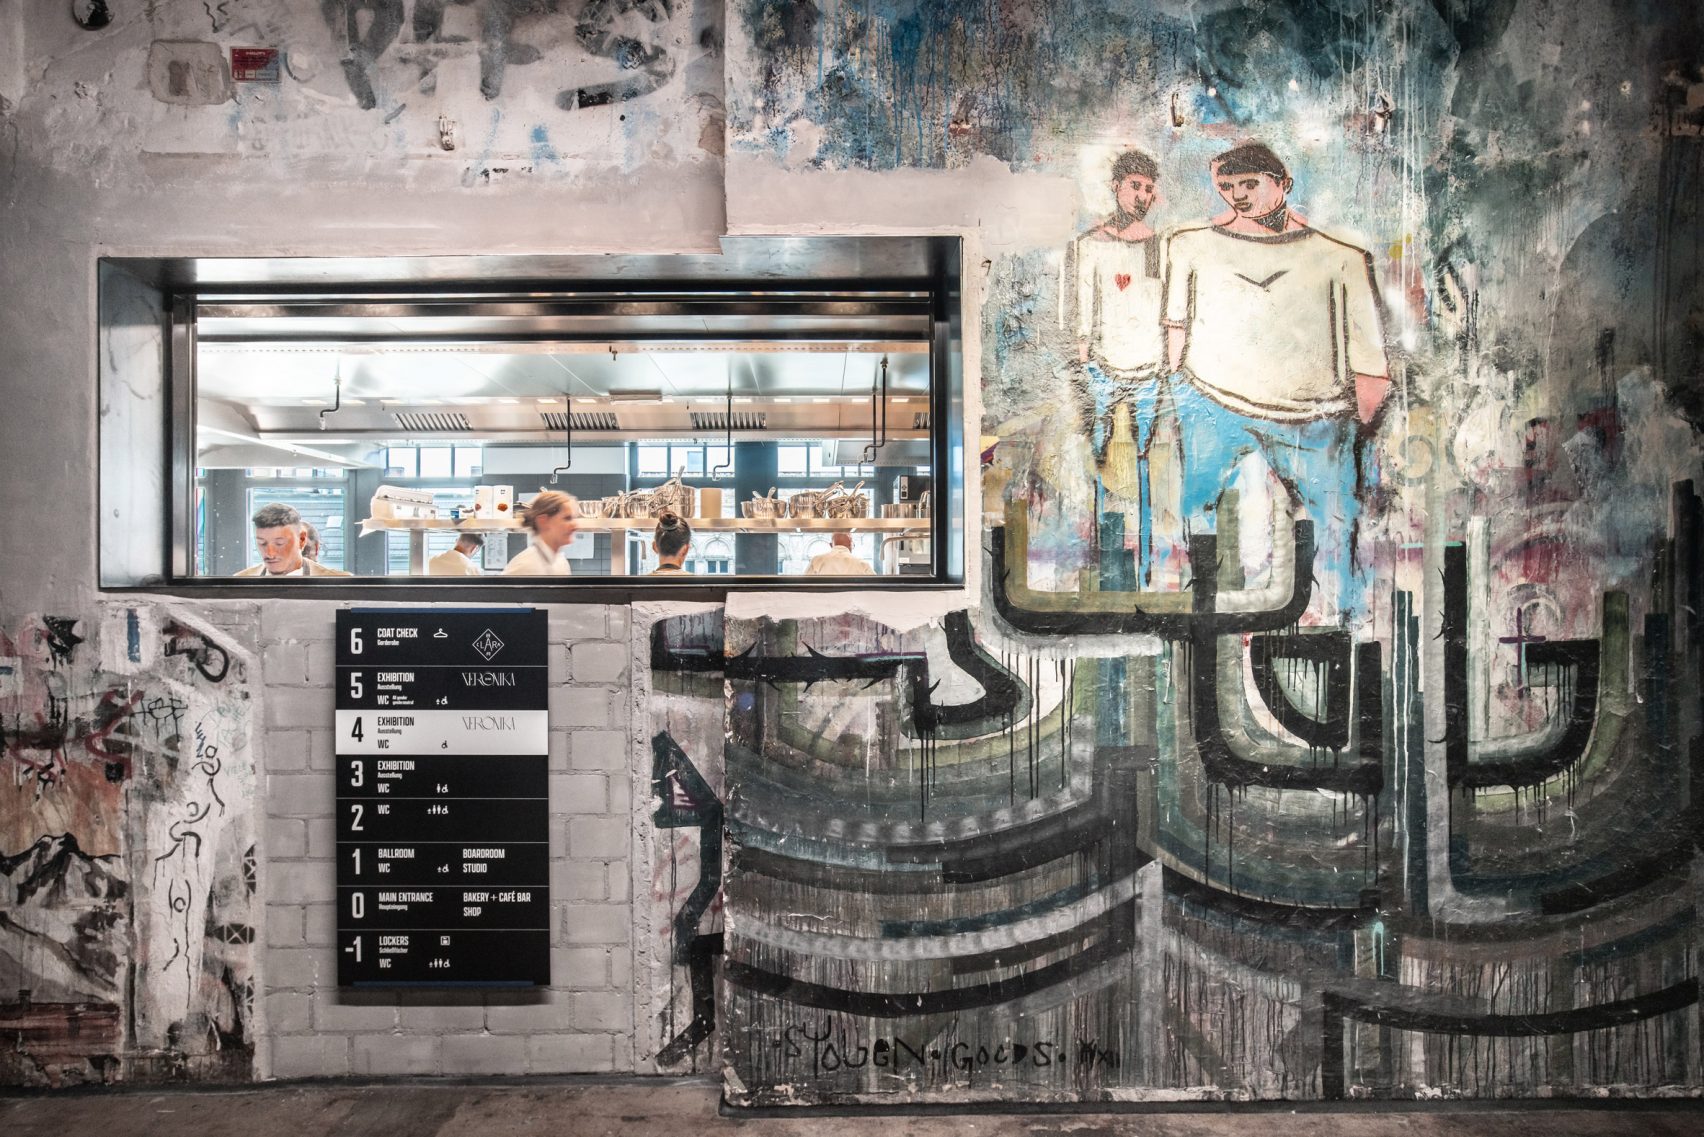 Photo of the historic graffiti in the new Fotografiska Berline from a Dezeen article